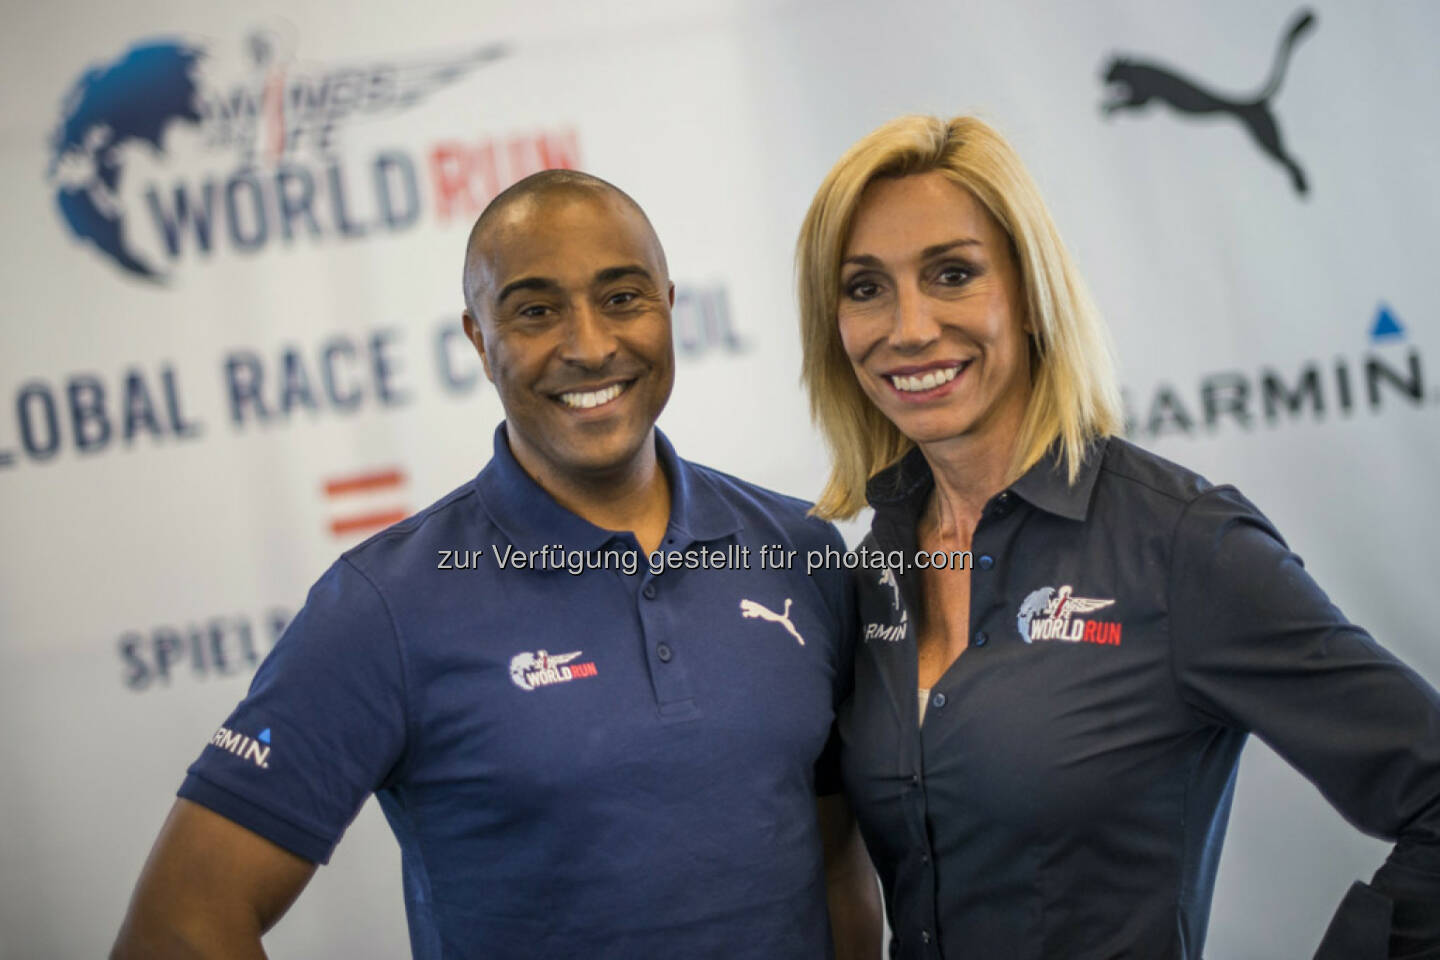 Wings for Life CEO Anita Gerhardter (L) of  Austria and Wings for Life World Run Race Director Colin Jackson (R) of Great Britain Please go to www.redbullcontentpool.com for further information. // 